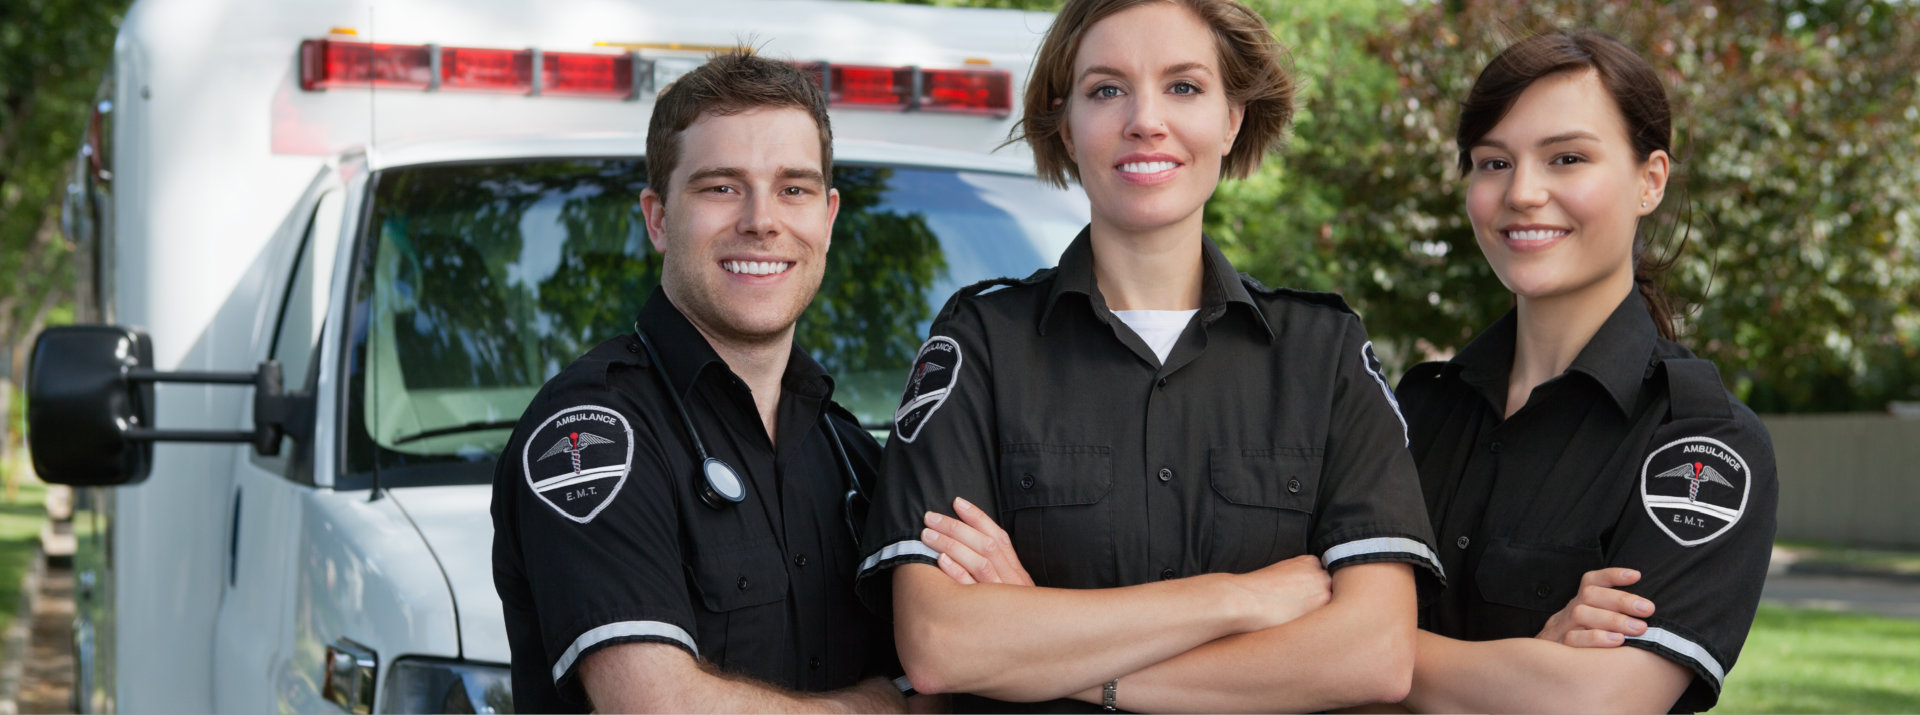 Group of three paramedics standing in front of ambulance with smile